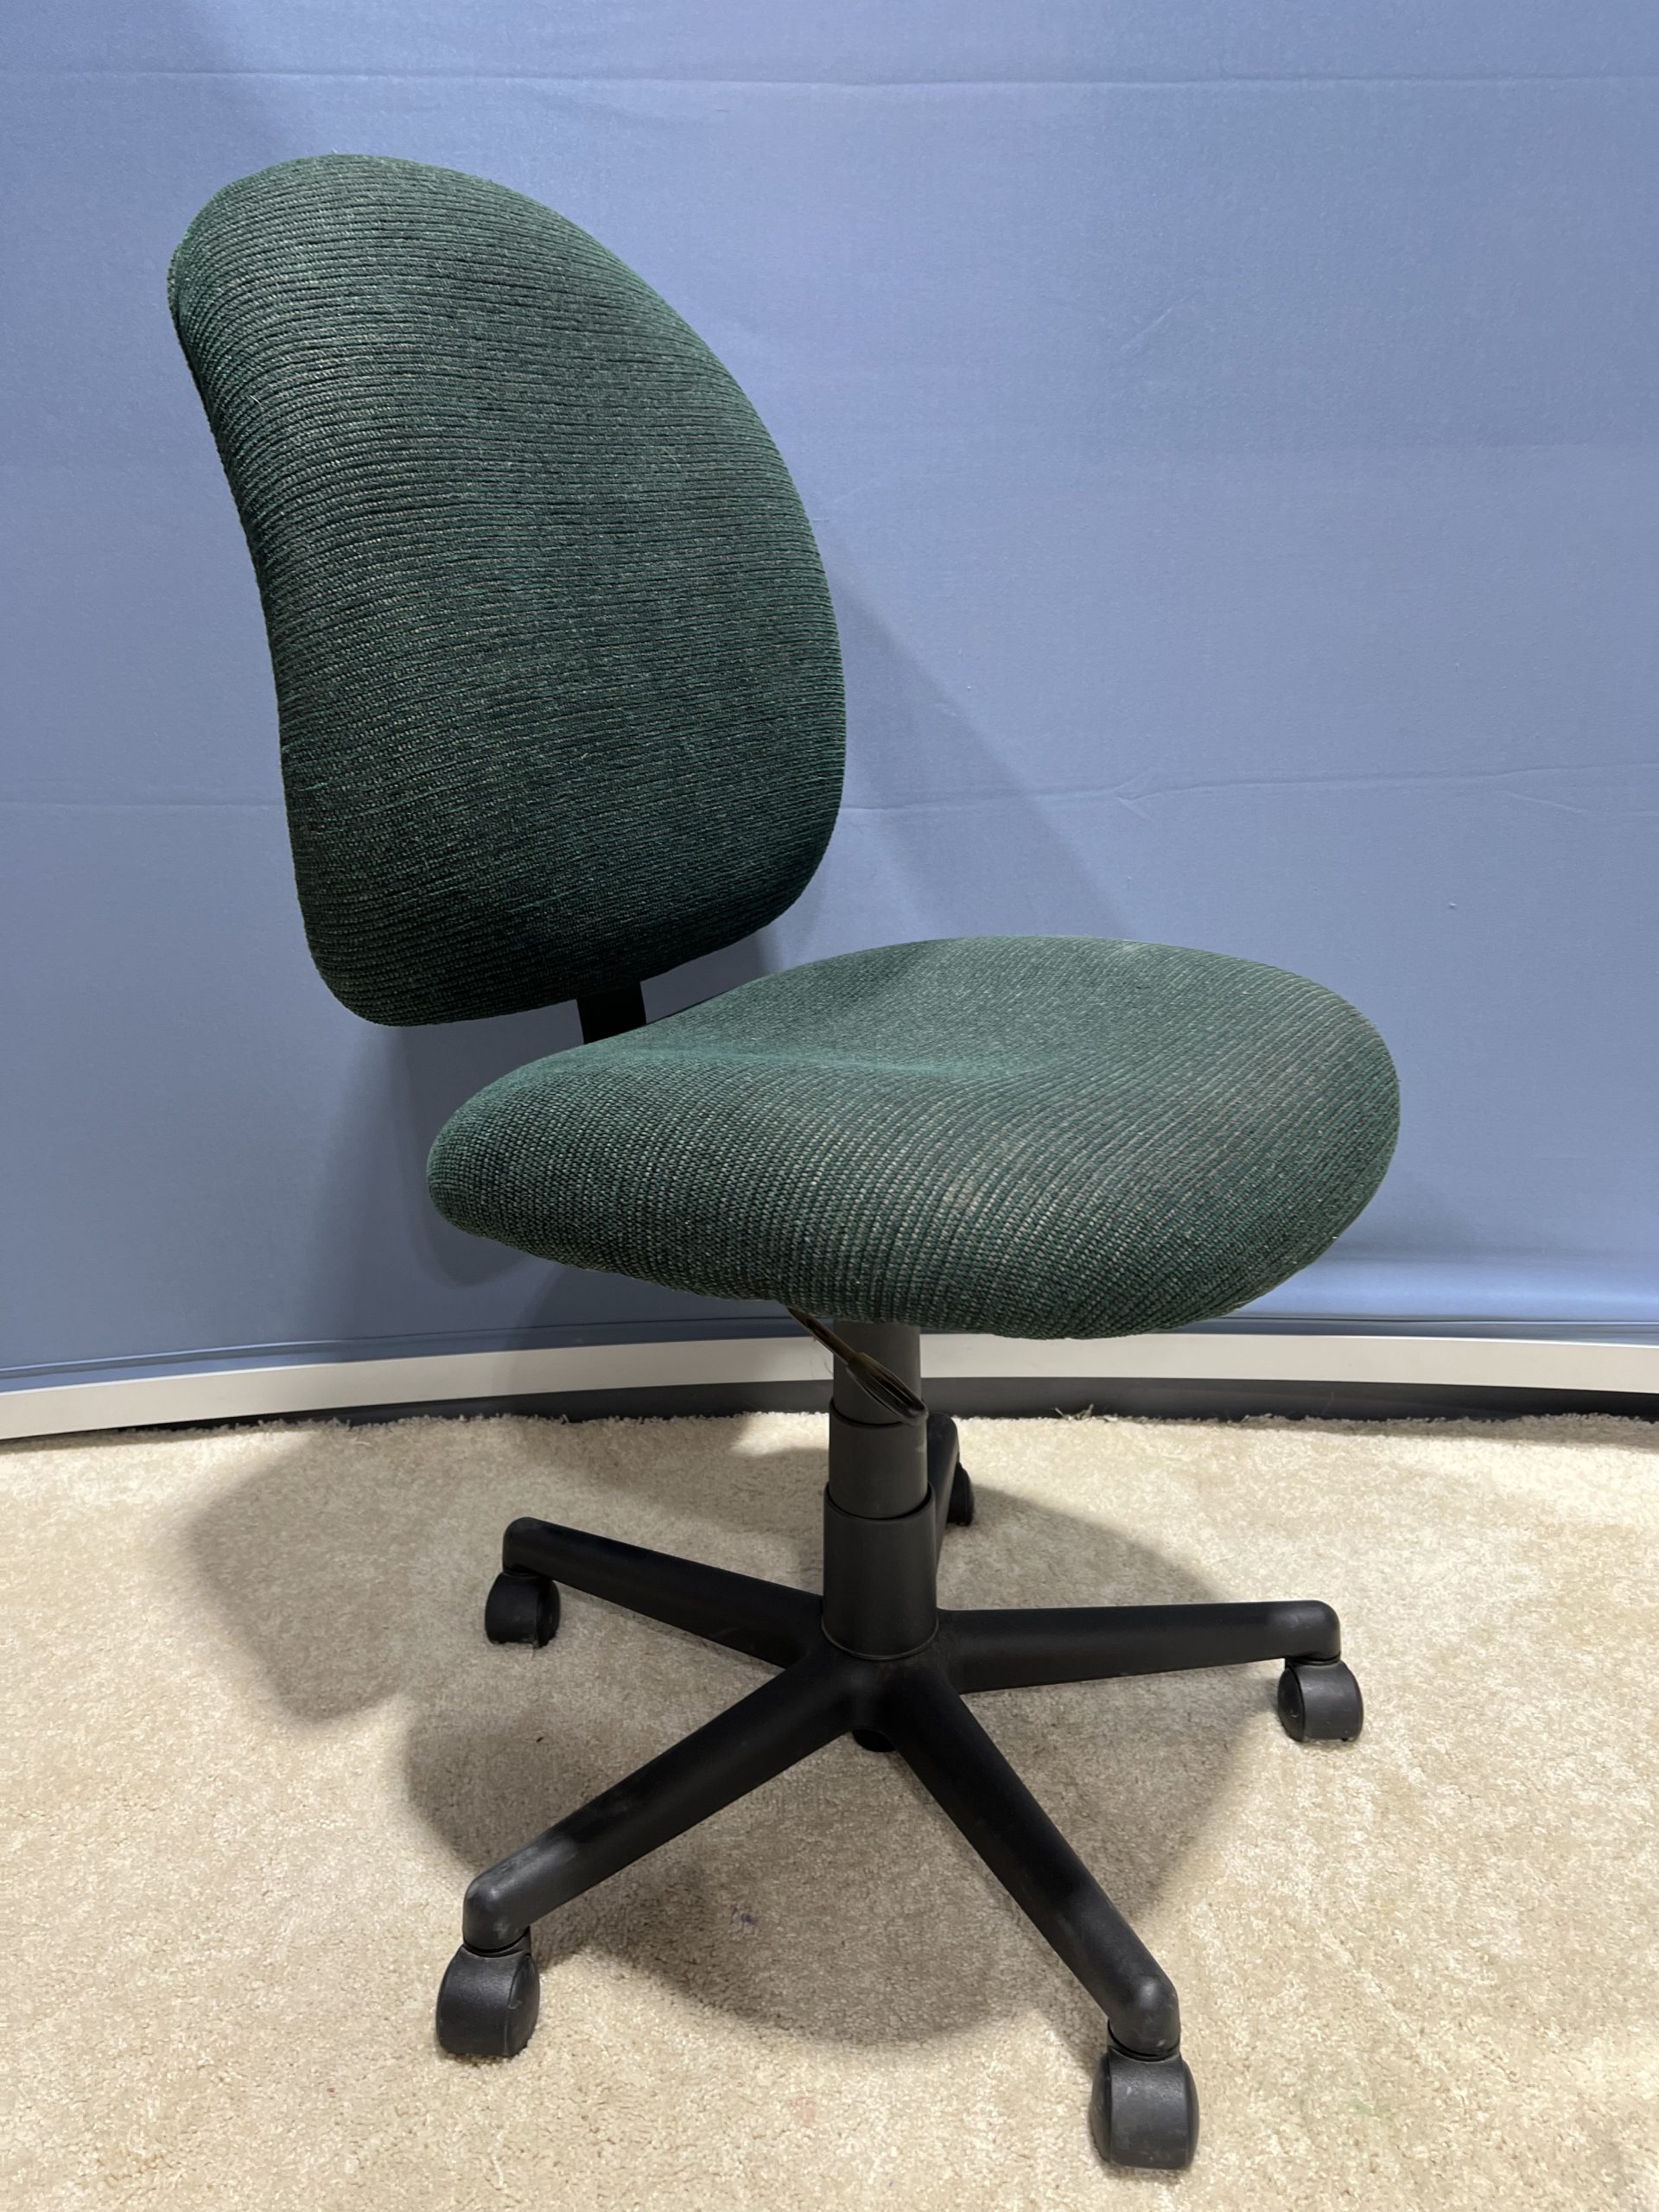 Chair Mulitask Green No Arms 1 of 1-image